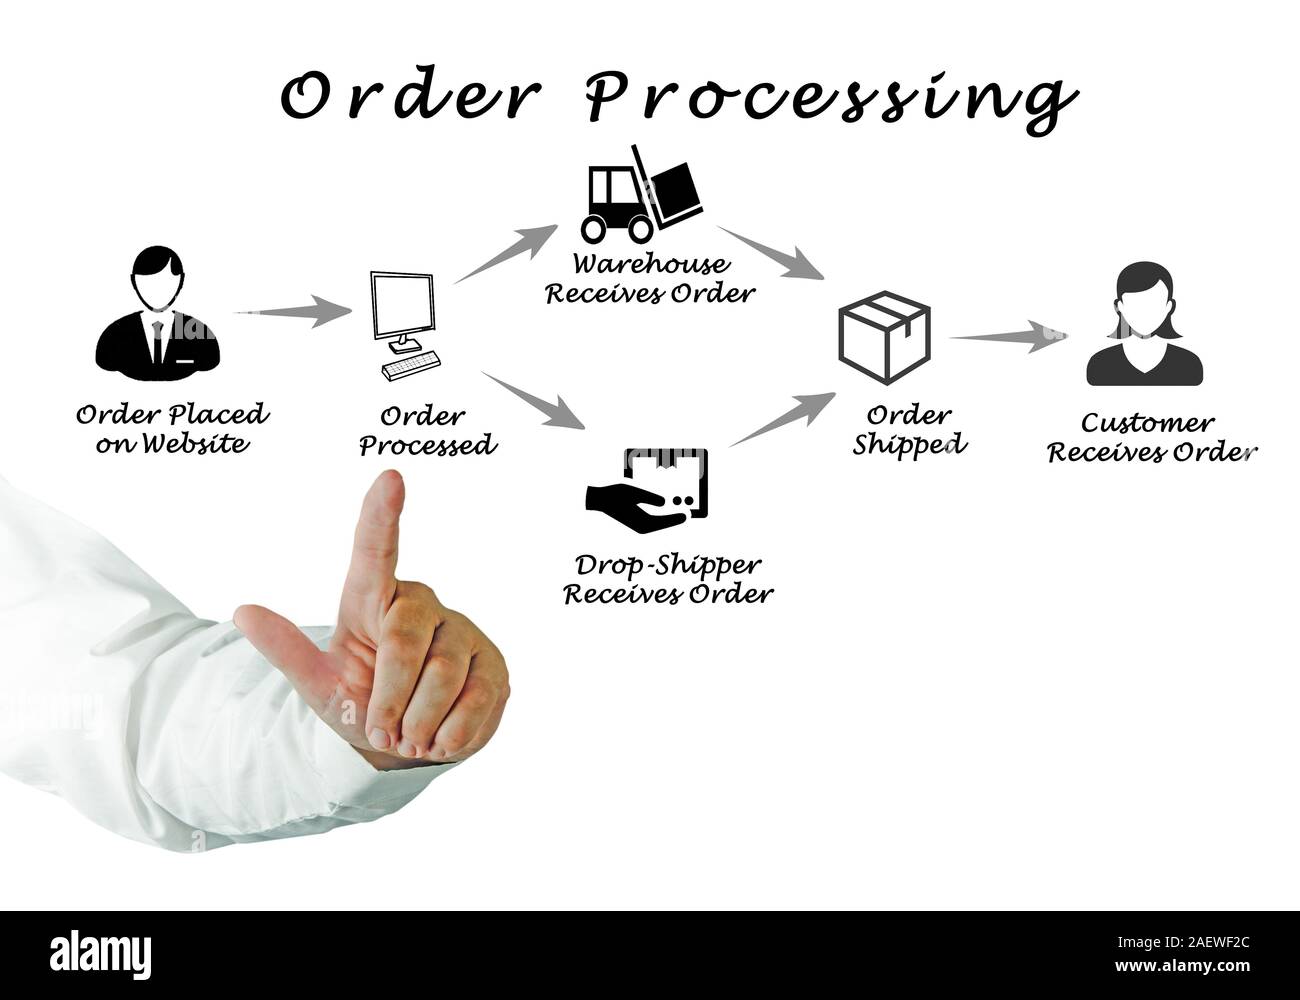 Processing your order. Обработка заказов. Обработка заказа картинка. Order processing. Order is processed web.